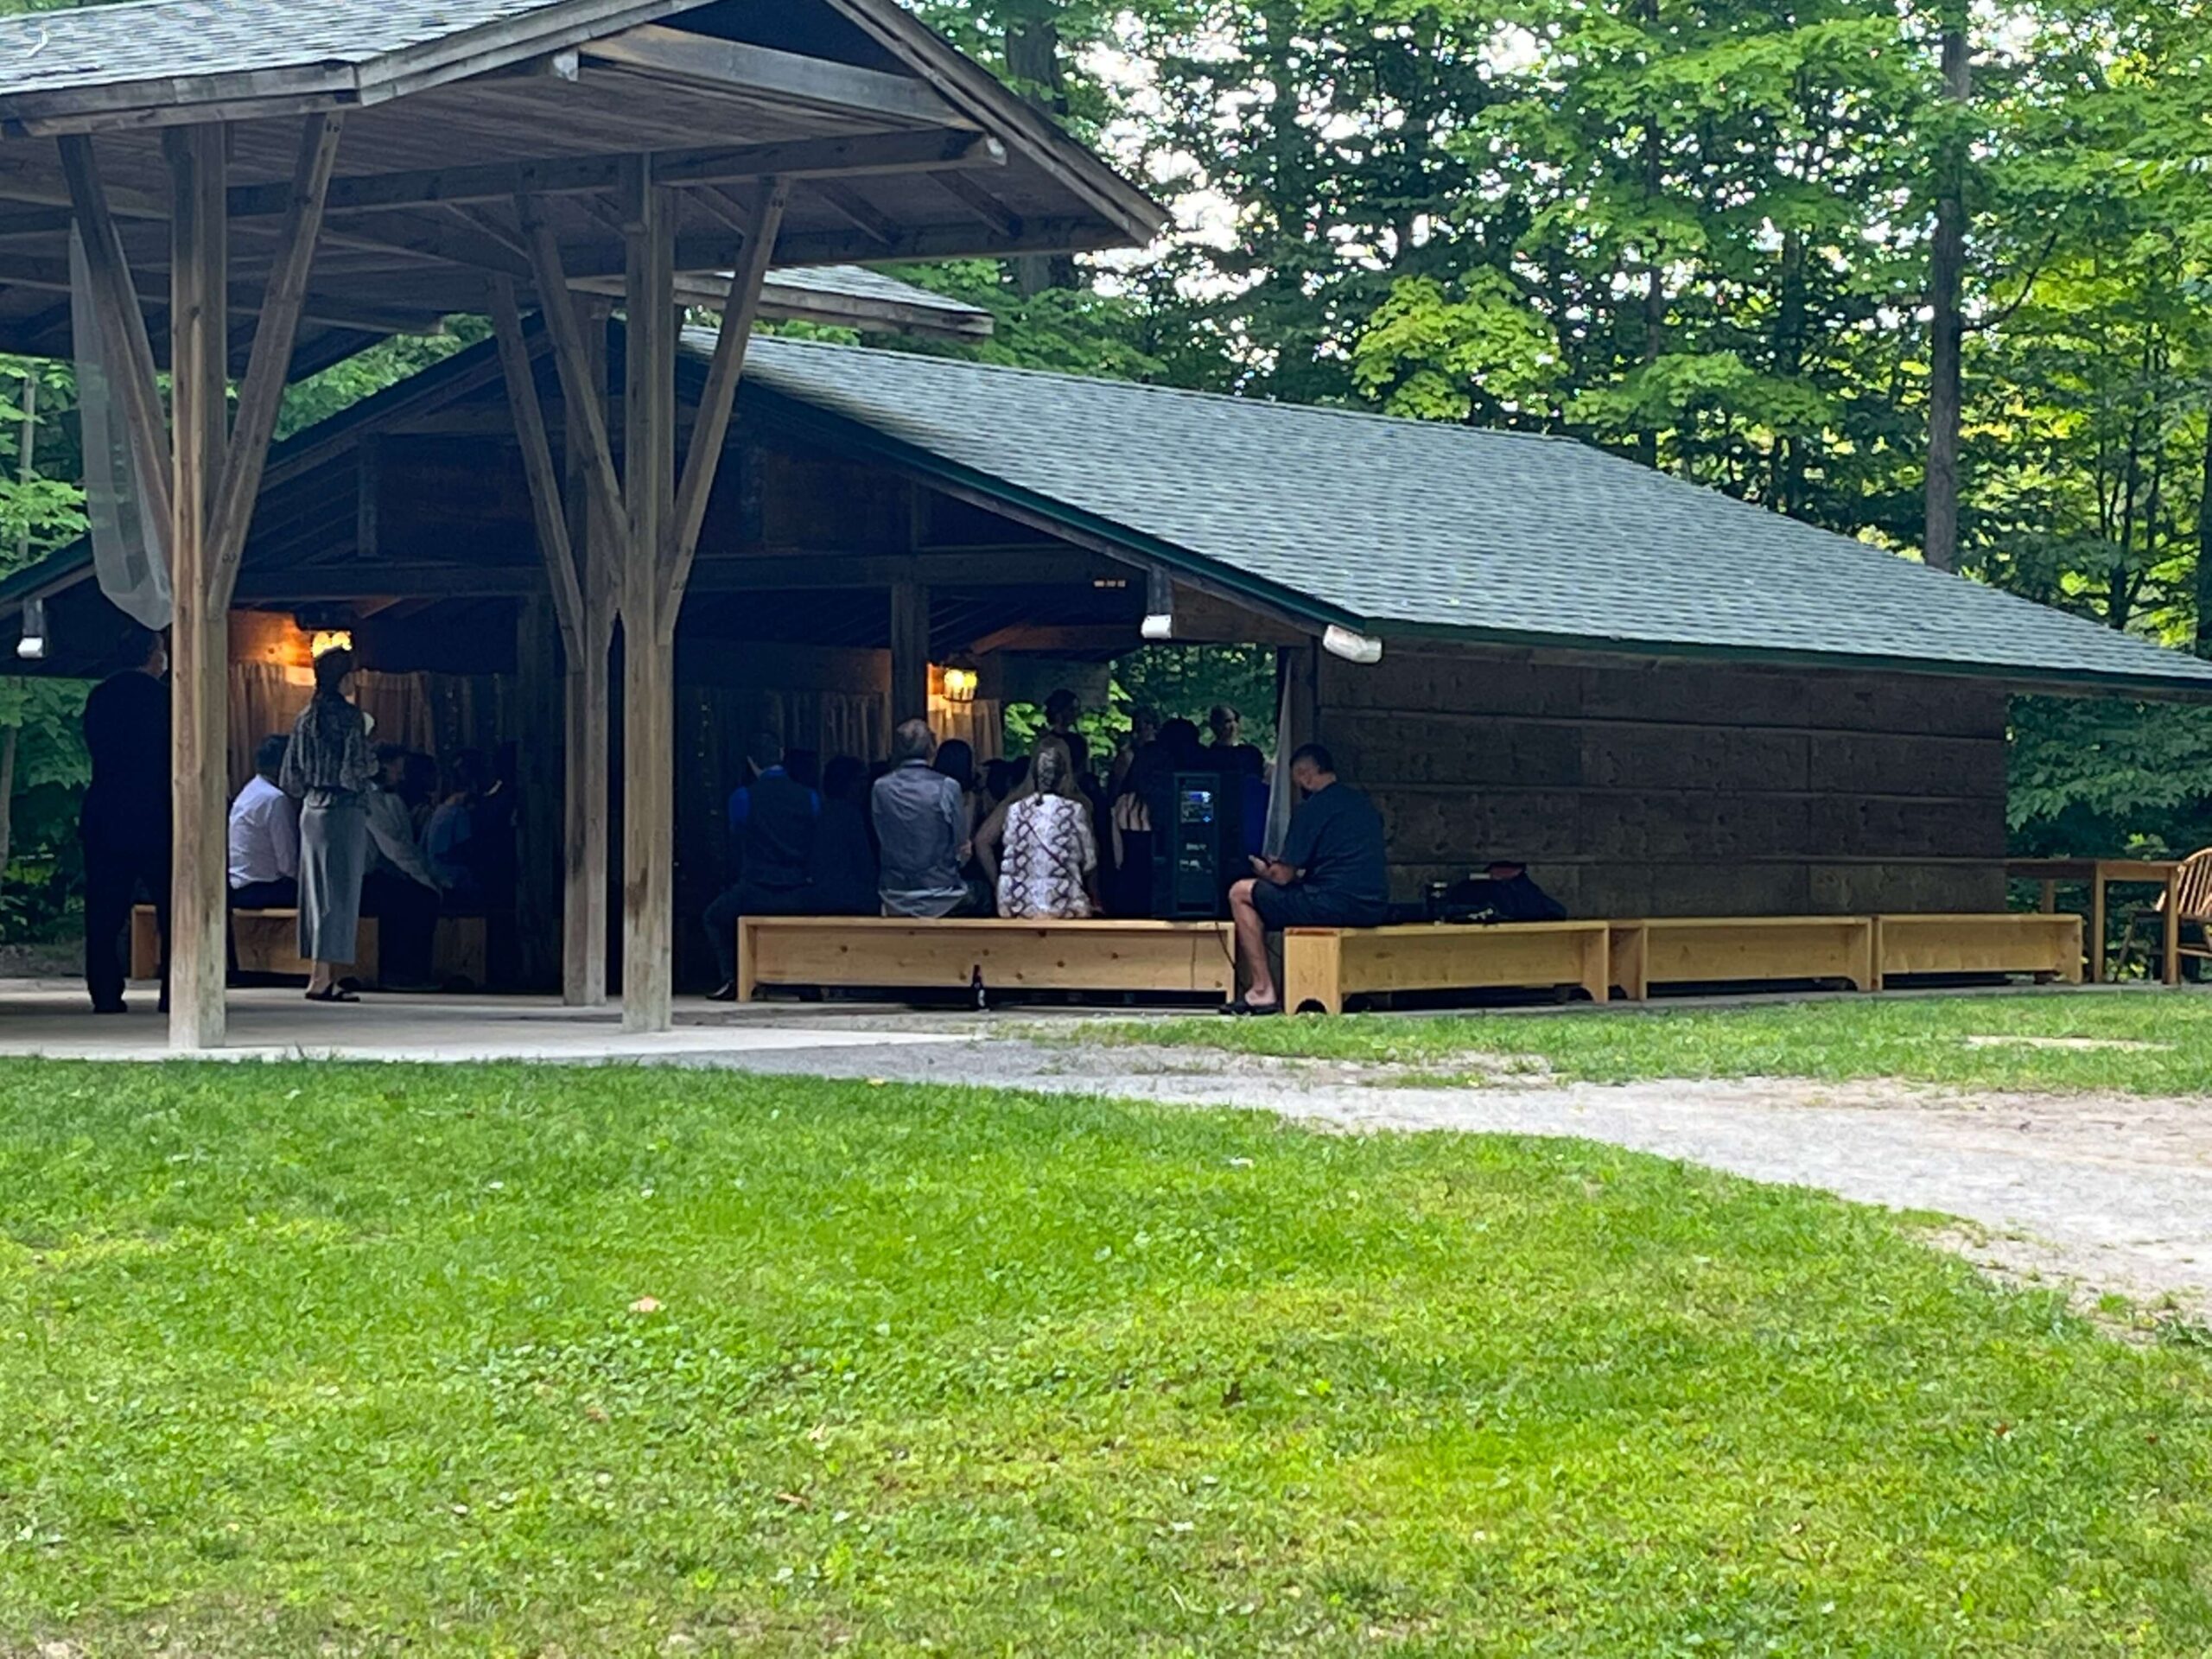 The wedding ceremony in a simple wood structure in the forest